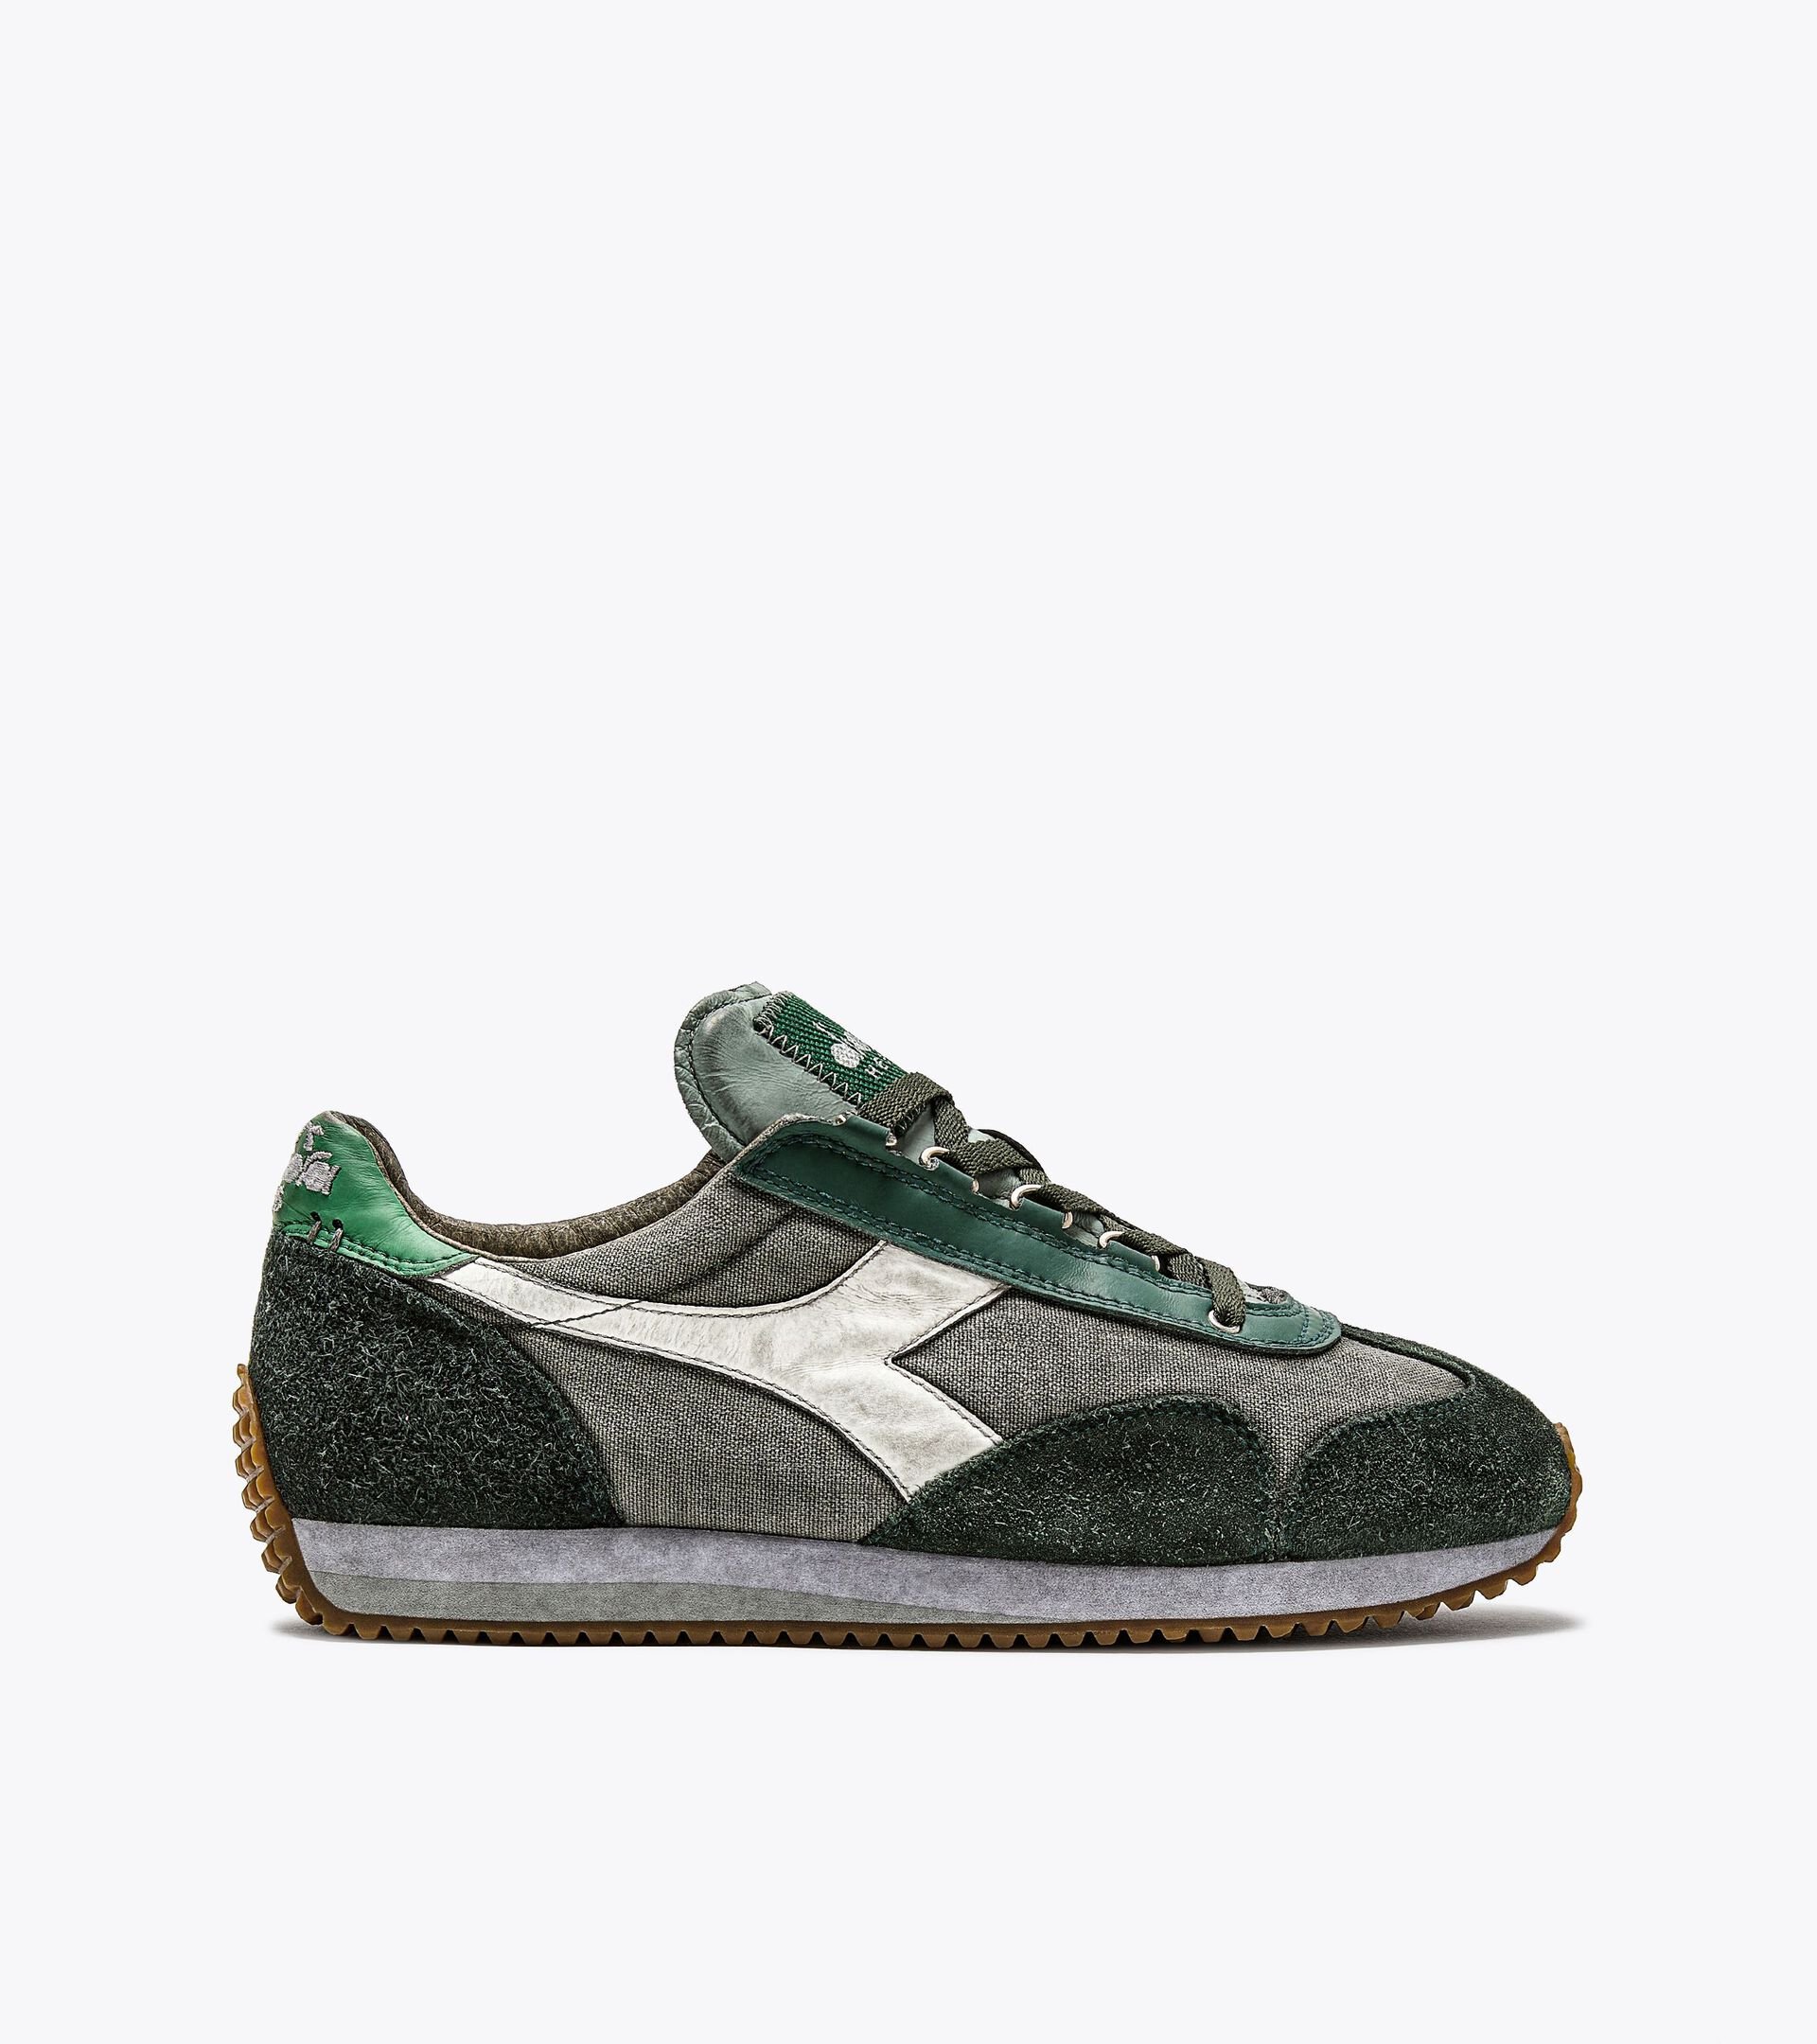 Chaussures Heritage - Gender neutral EQUIPE H DIRTY STONE WASH EVO SLATE GRAY - Diadora